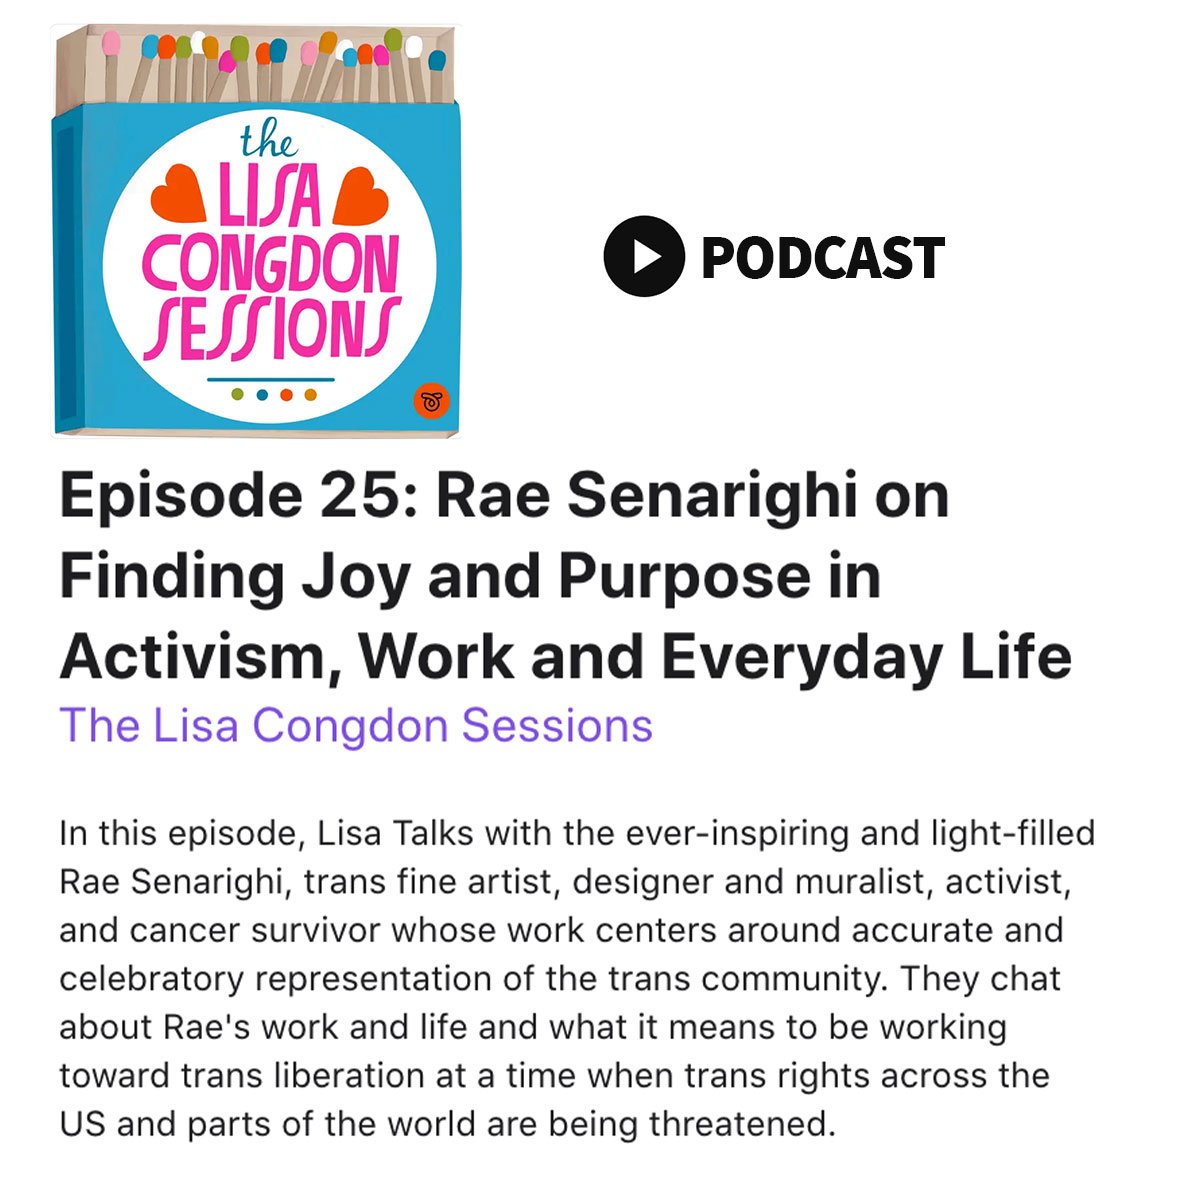 The Lisa Congdon Sessions Podcast